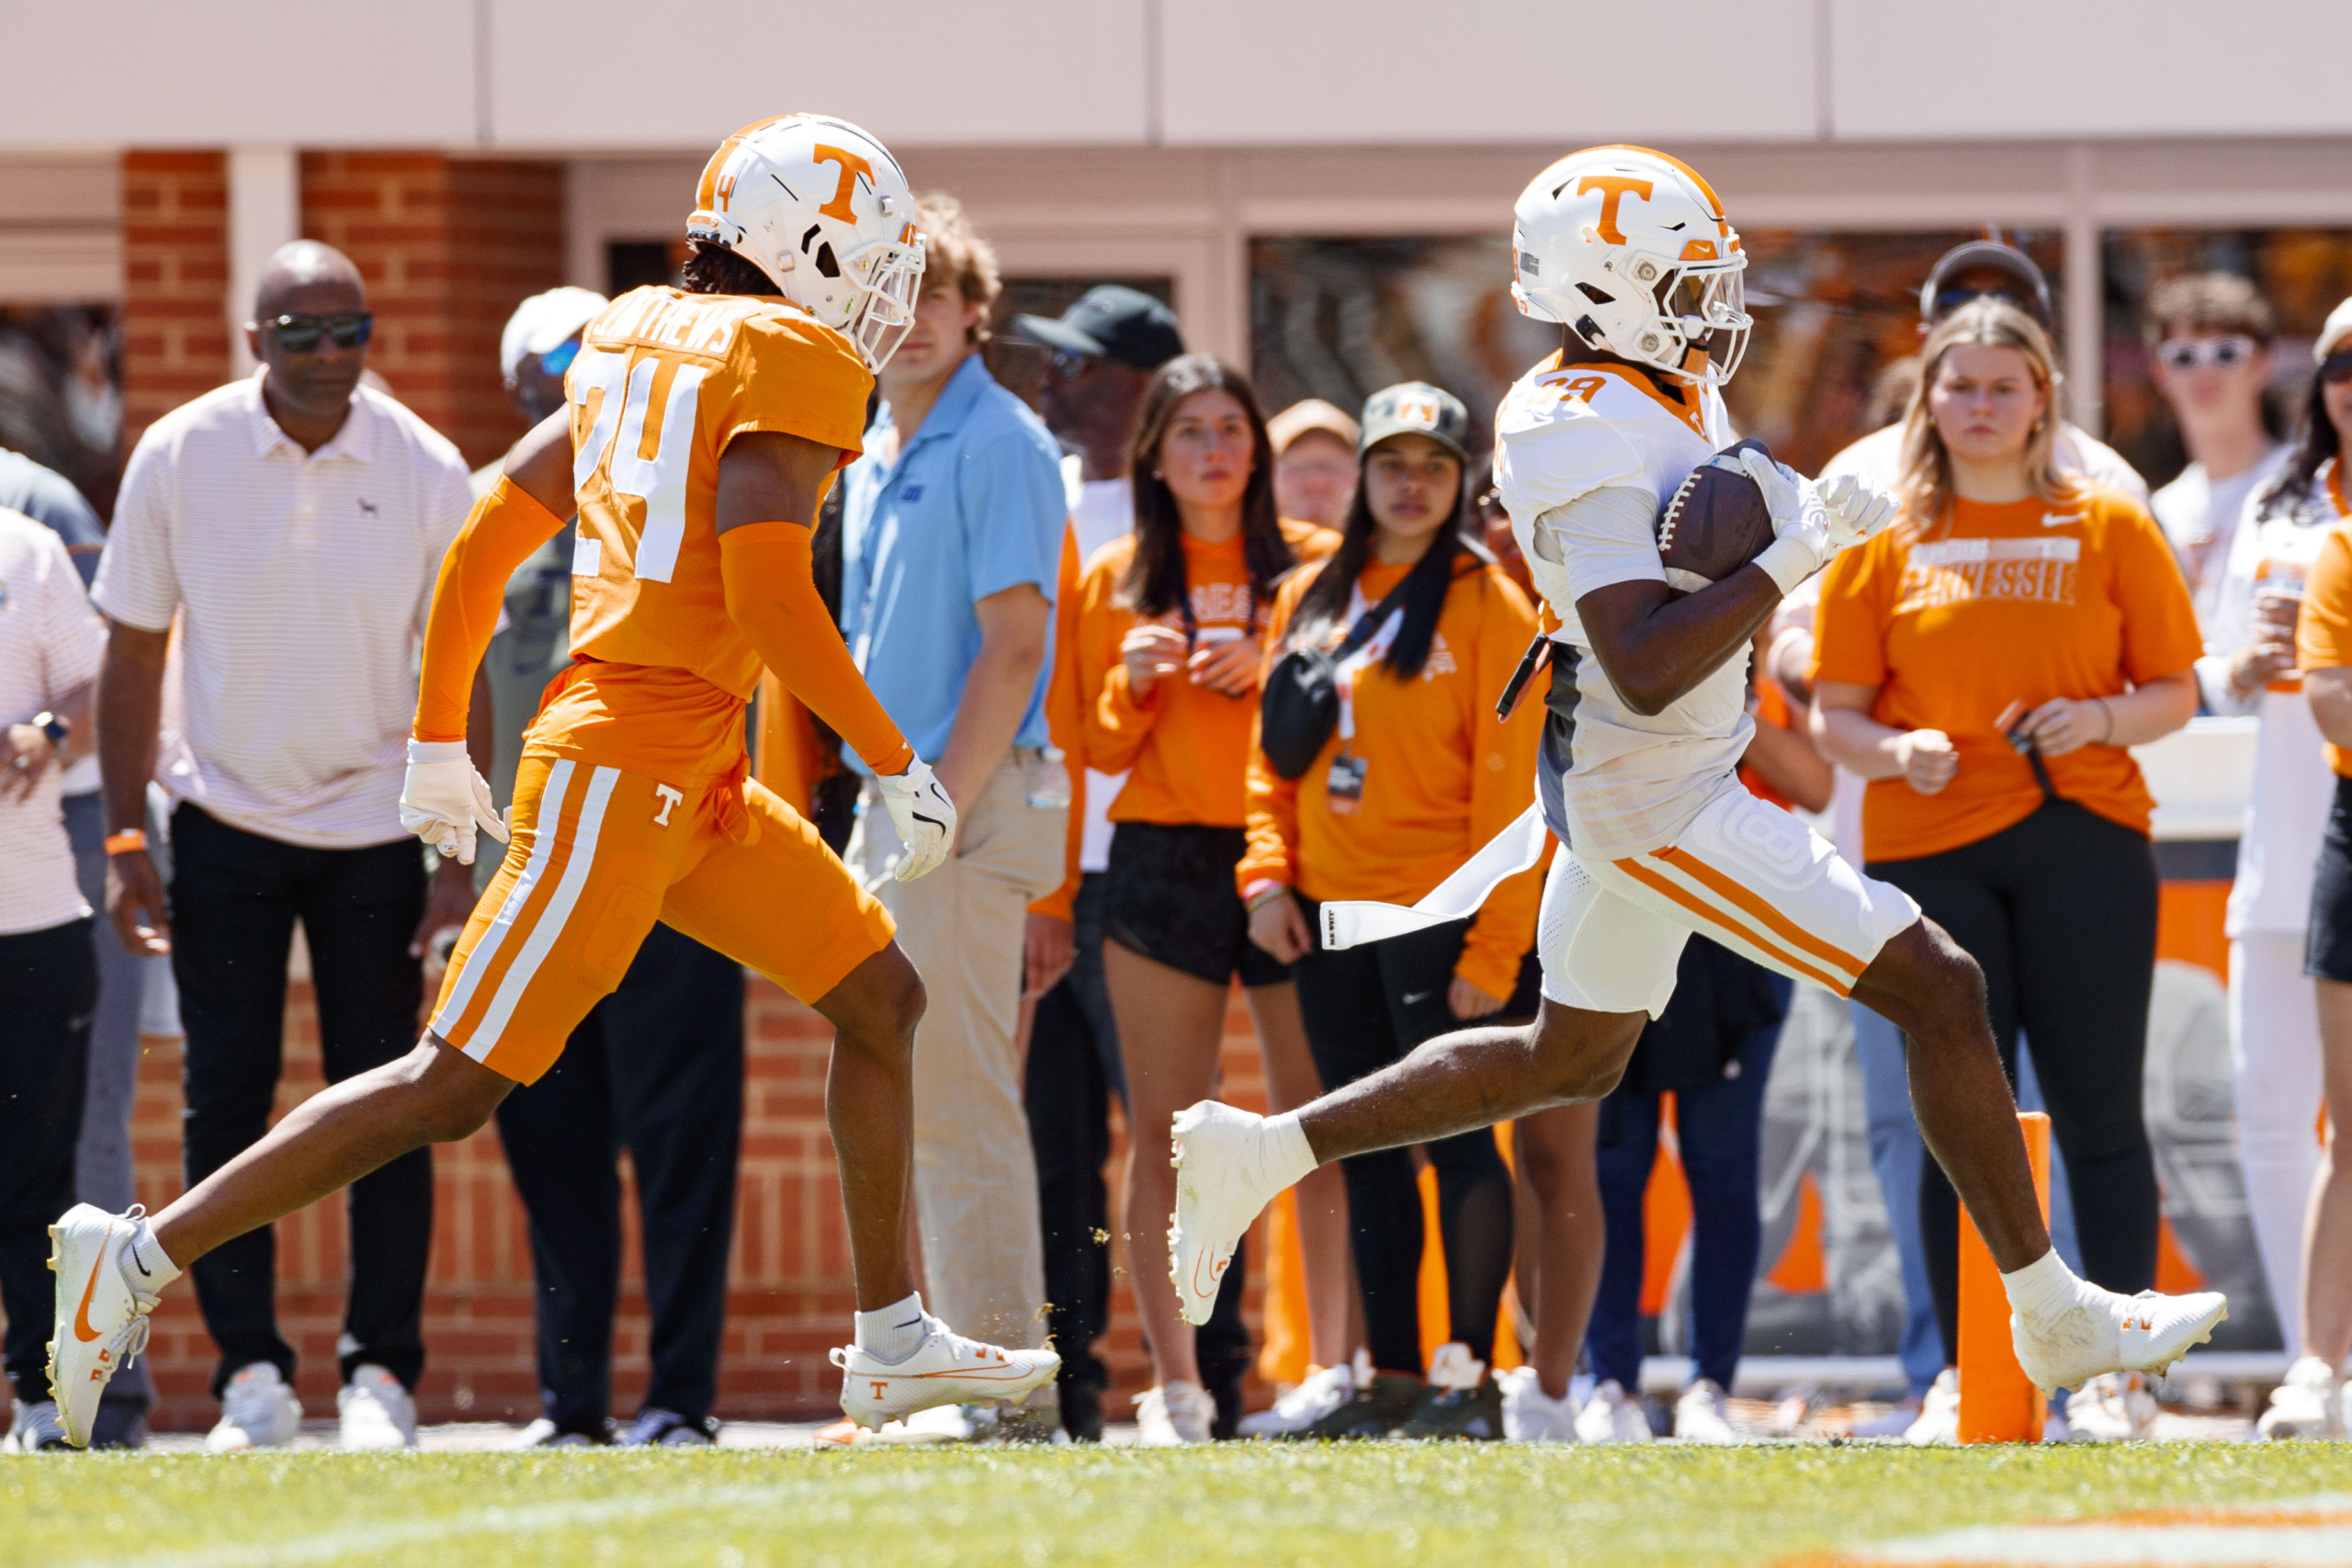 Website Poll Question: What’s your biggest question or concern about Vols football coming out of spring practice?